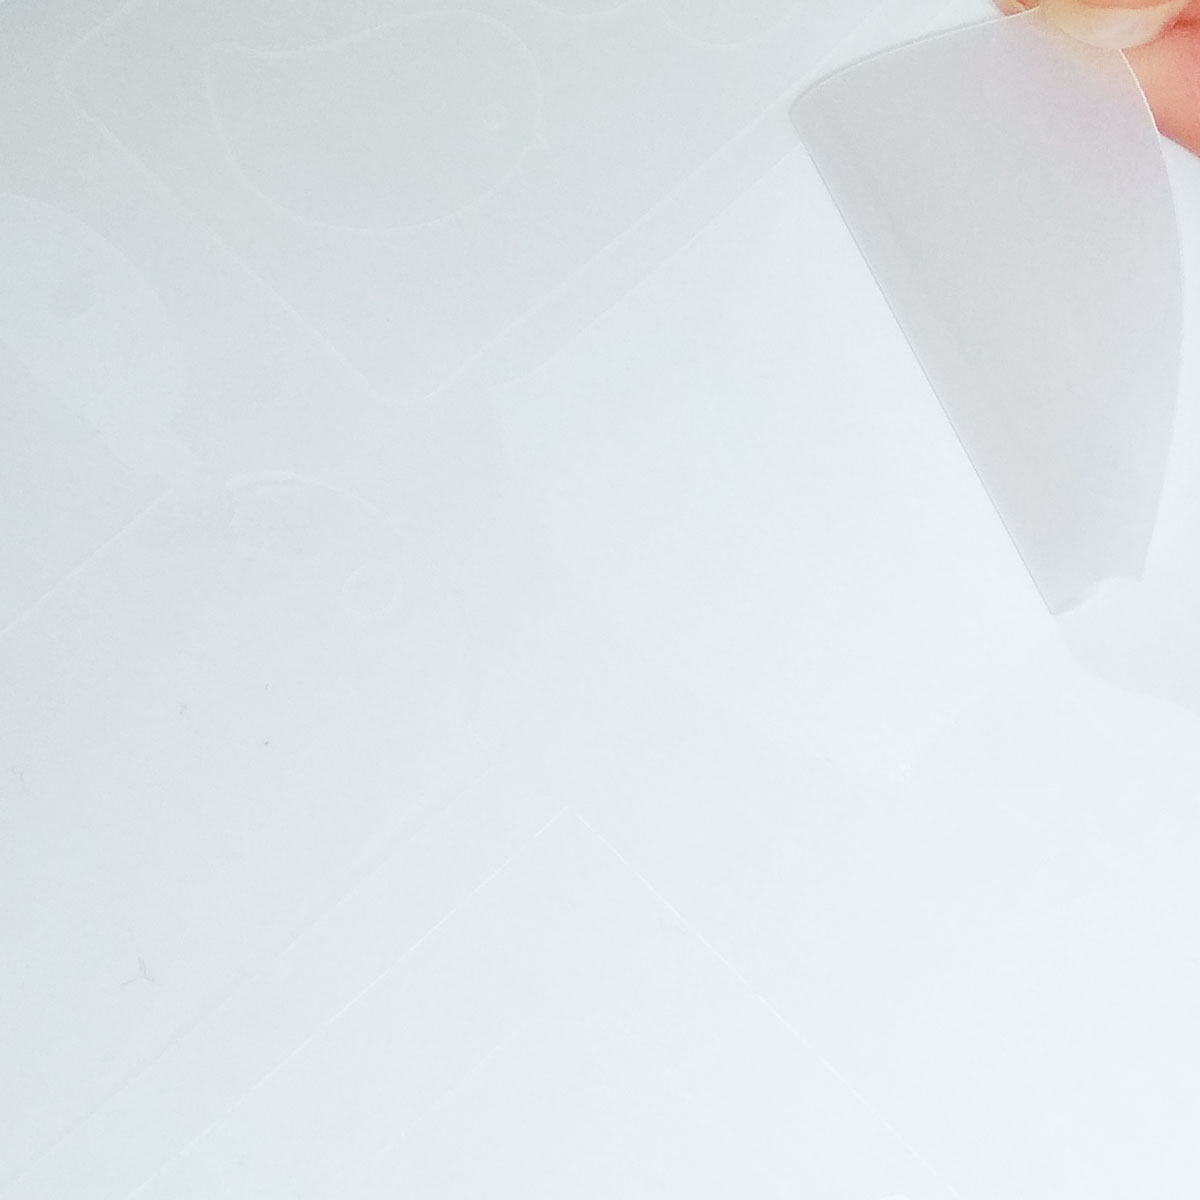 Self-adhesive translucent paper for laser printers and copiers